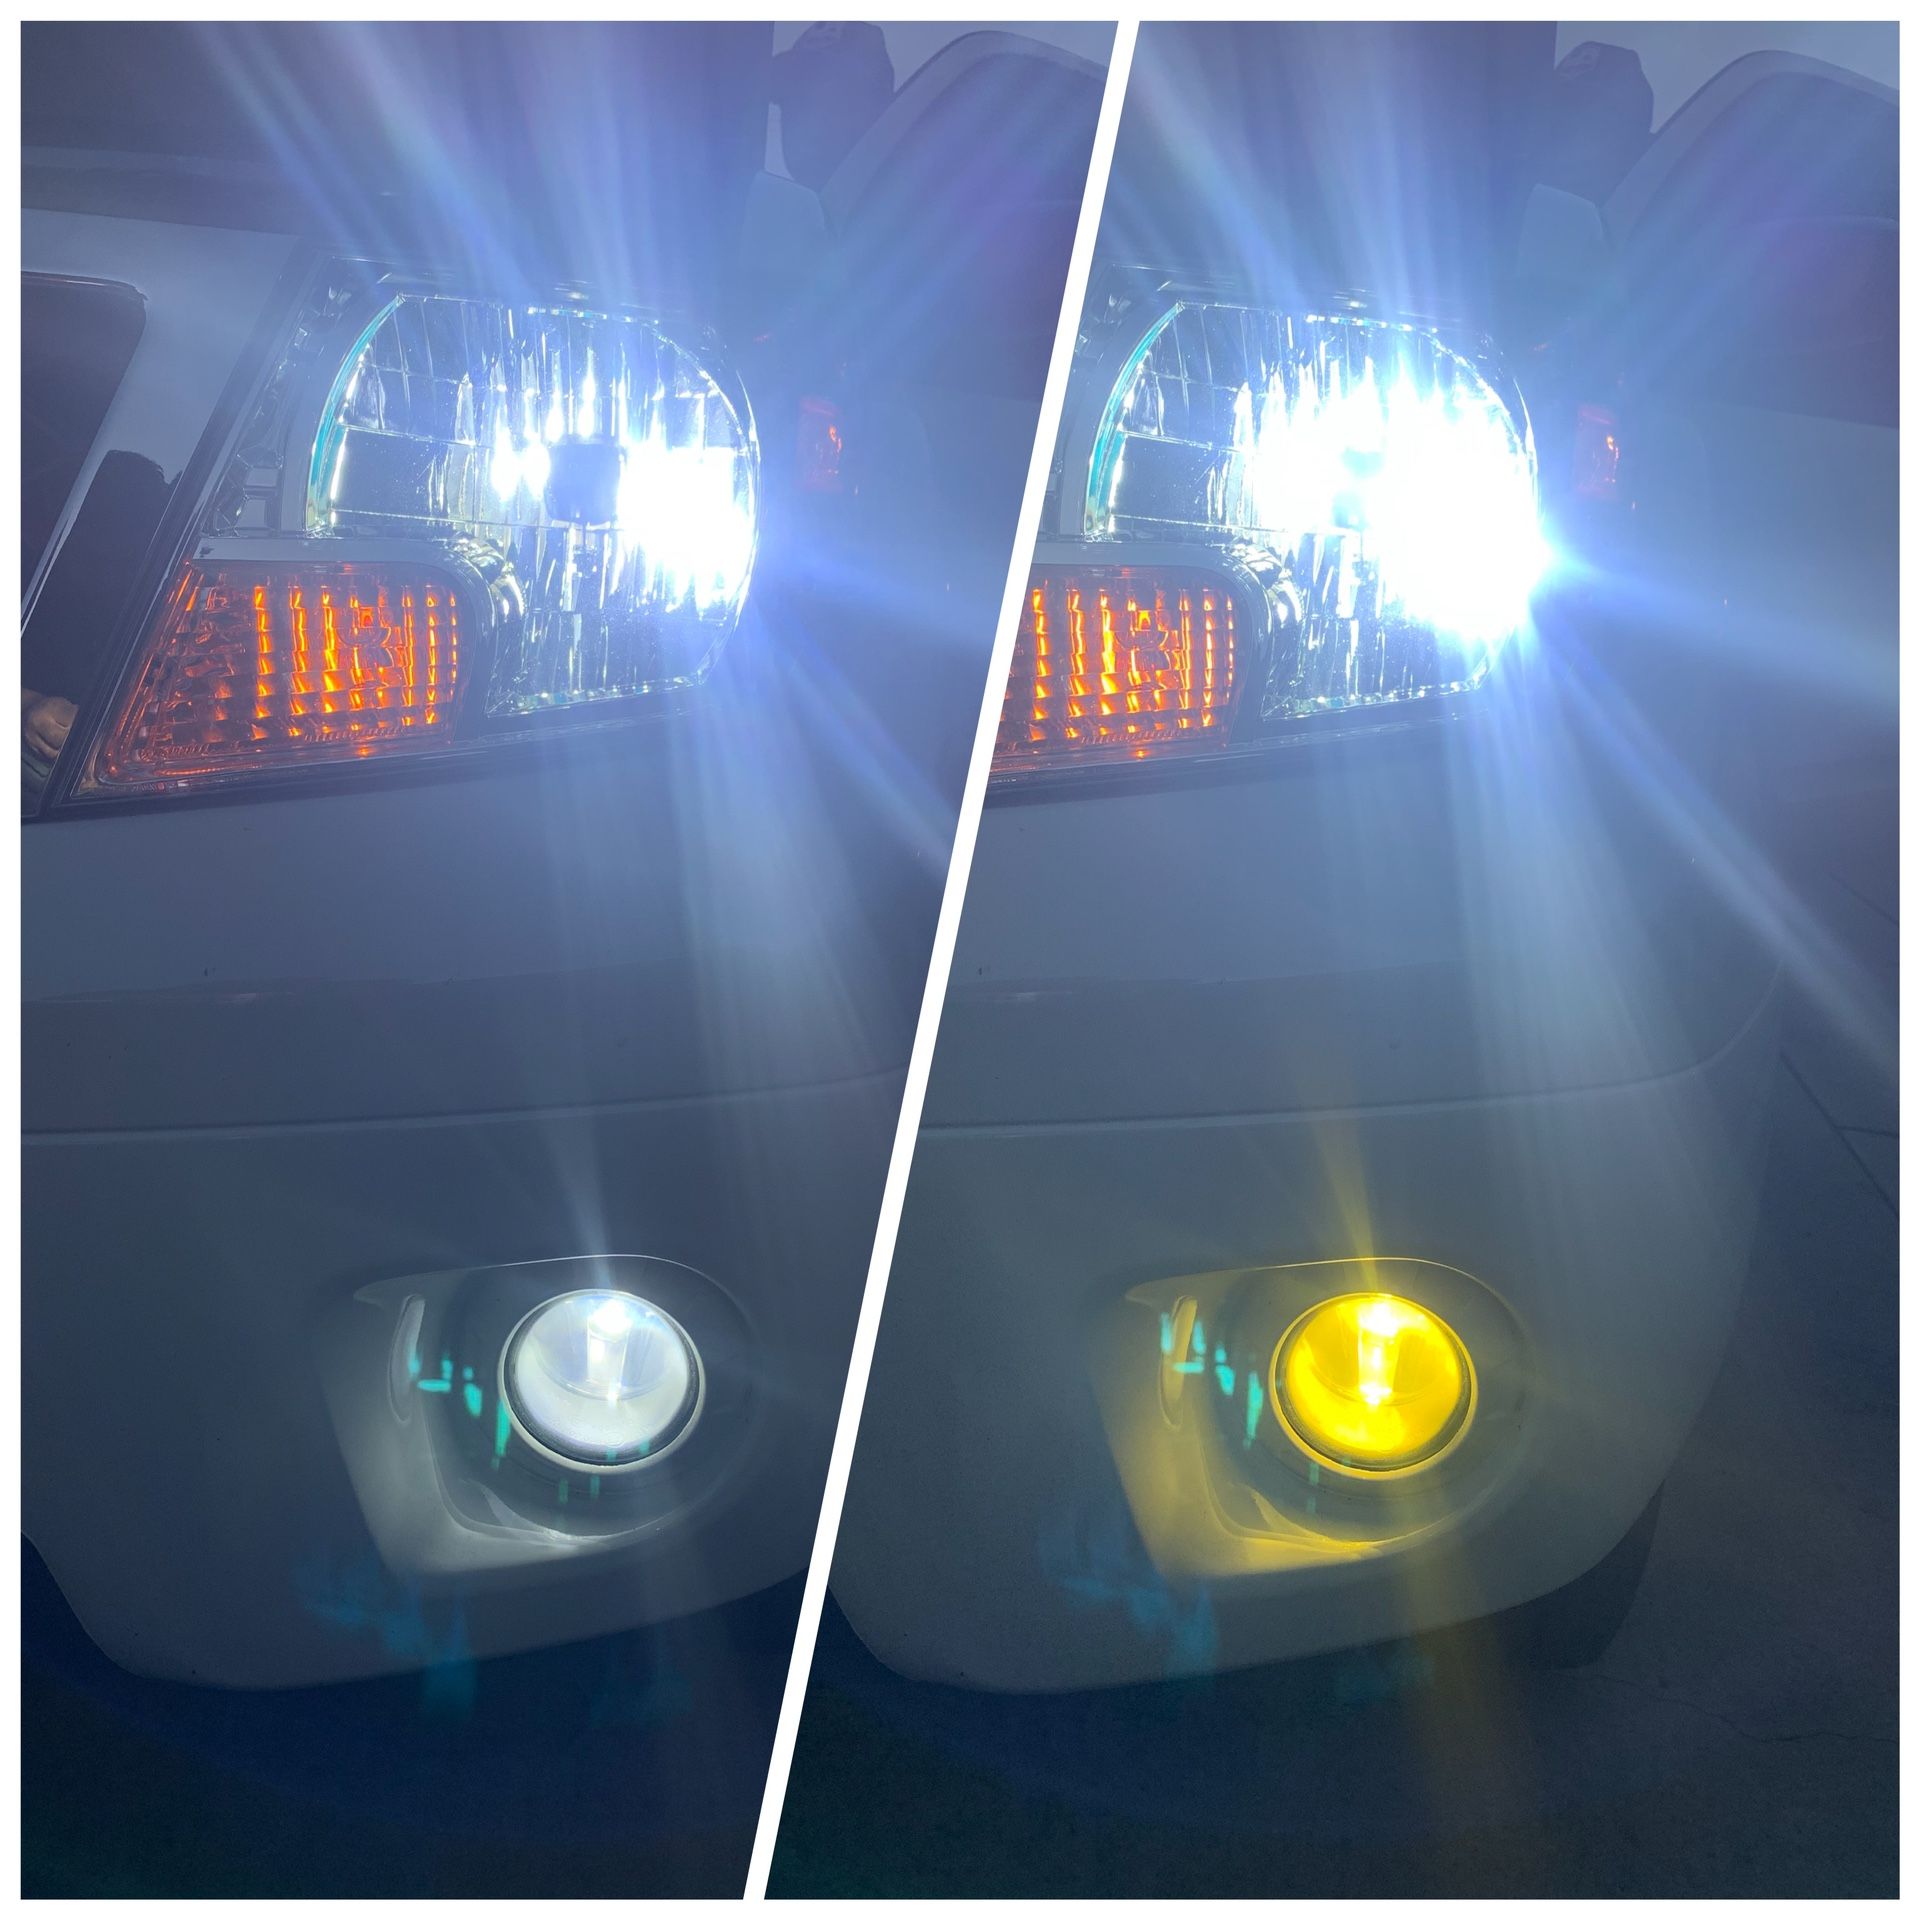 Super bright LEDs 25$ free license plate LEDs with purchase